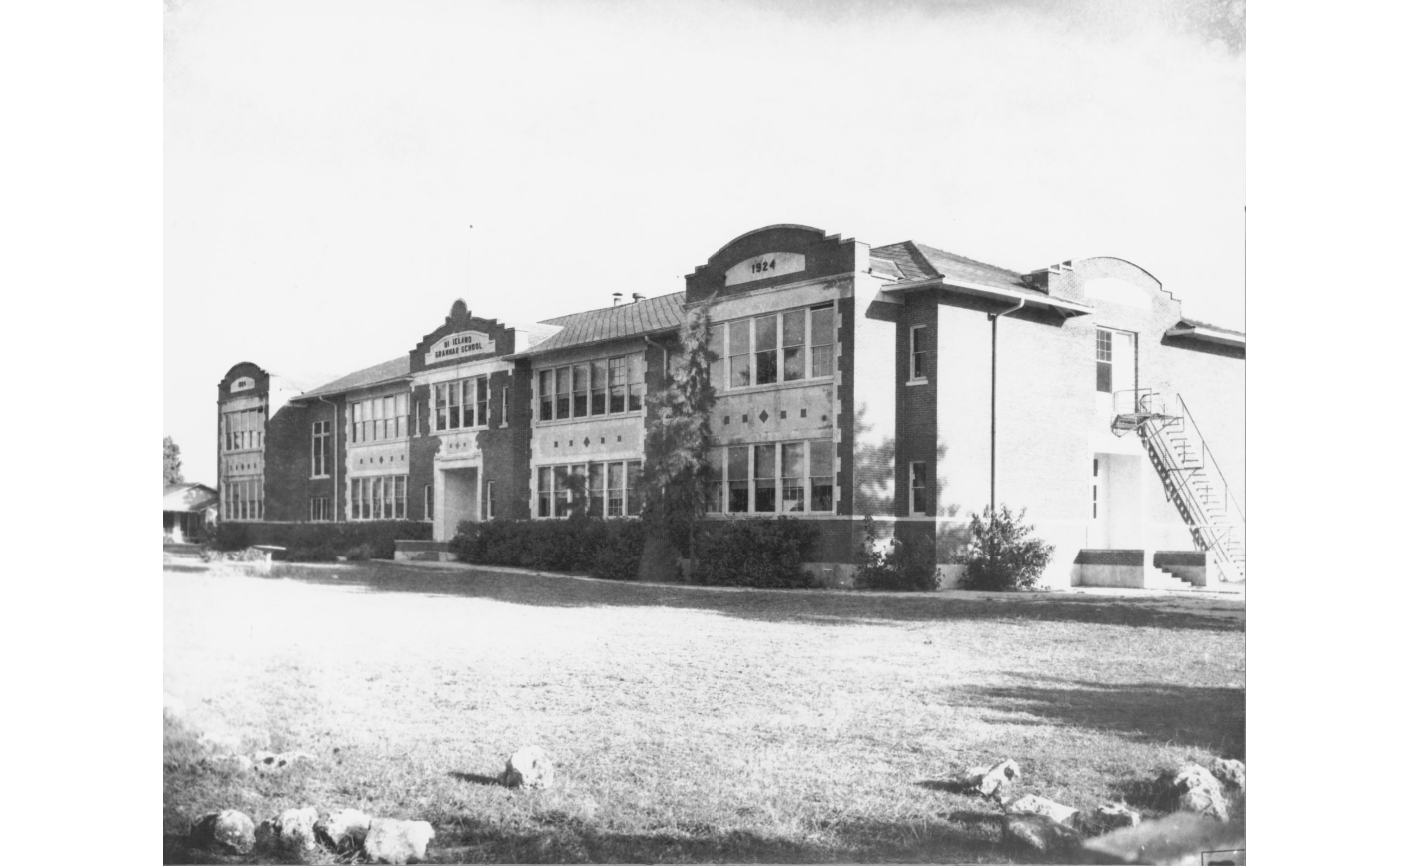 Originally called Dixieland Grammar School, Dixieland Elementary was built in 1924 at a cost of $67,500.  The brick and stucco building opened its doors to students in September 1924 and has been in continuous use as a school ever since. It underwent a $1.5 million renovation in 1993.